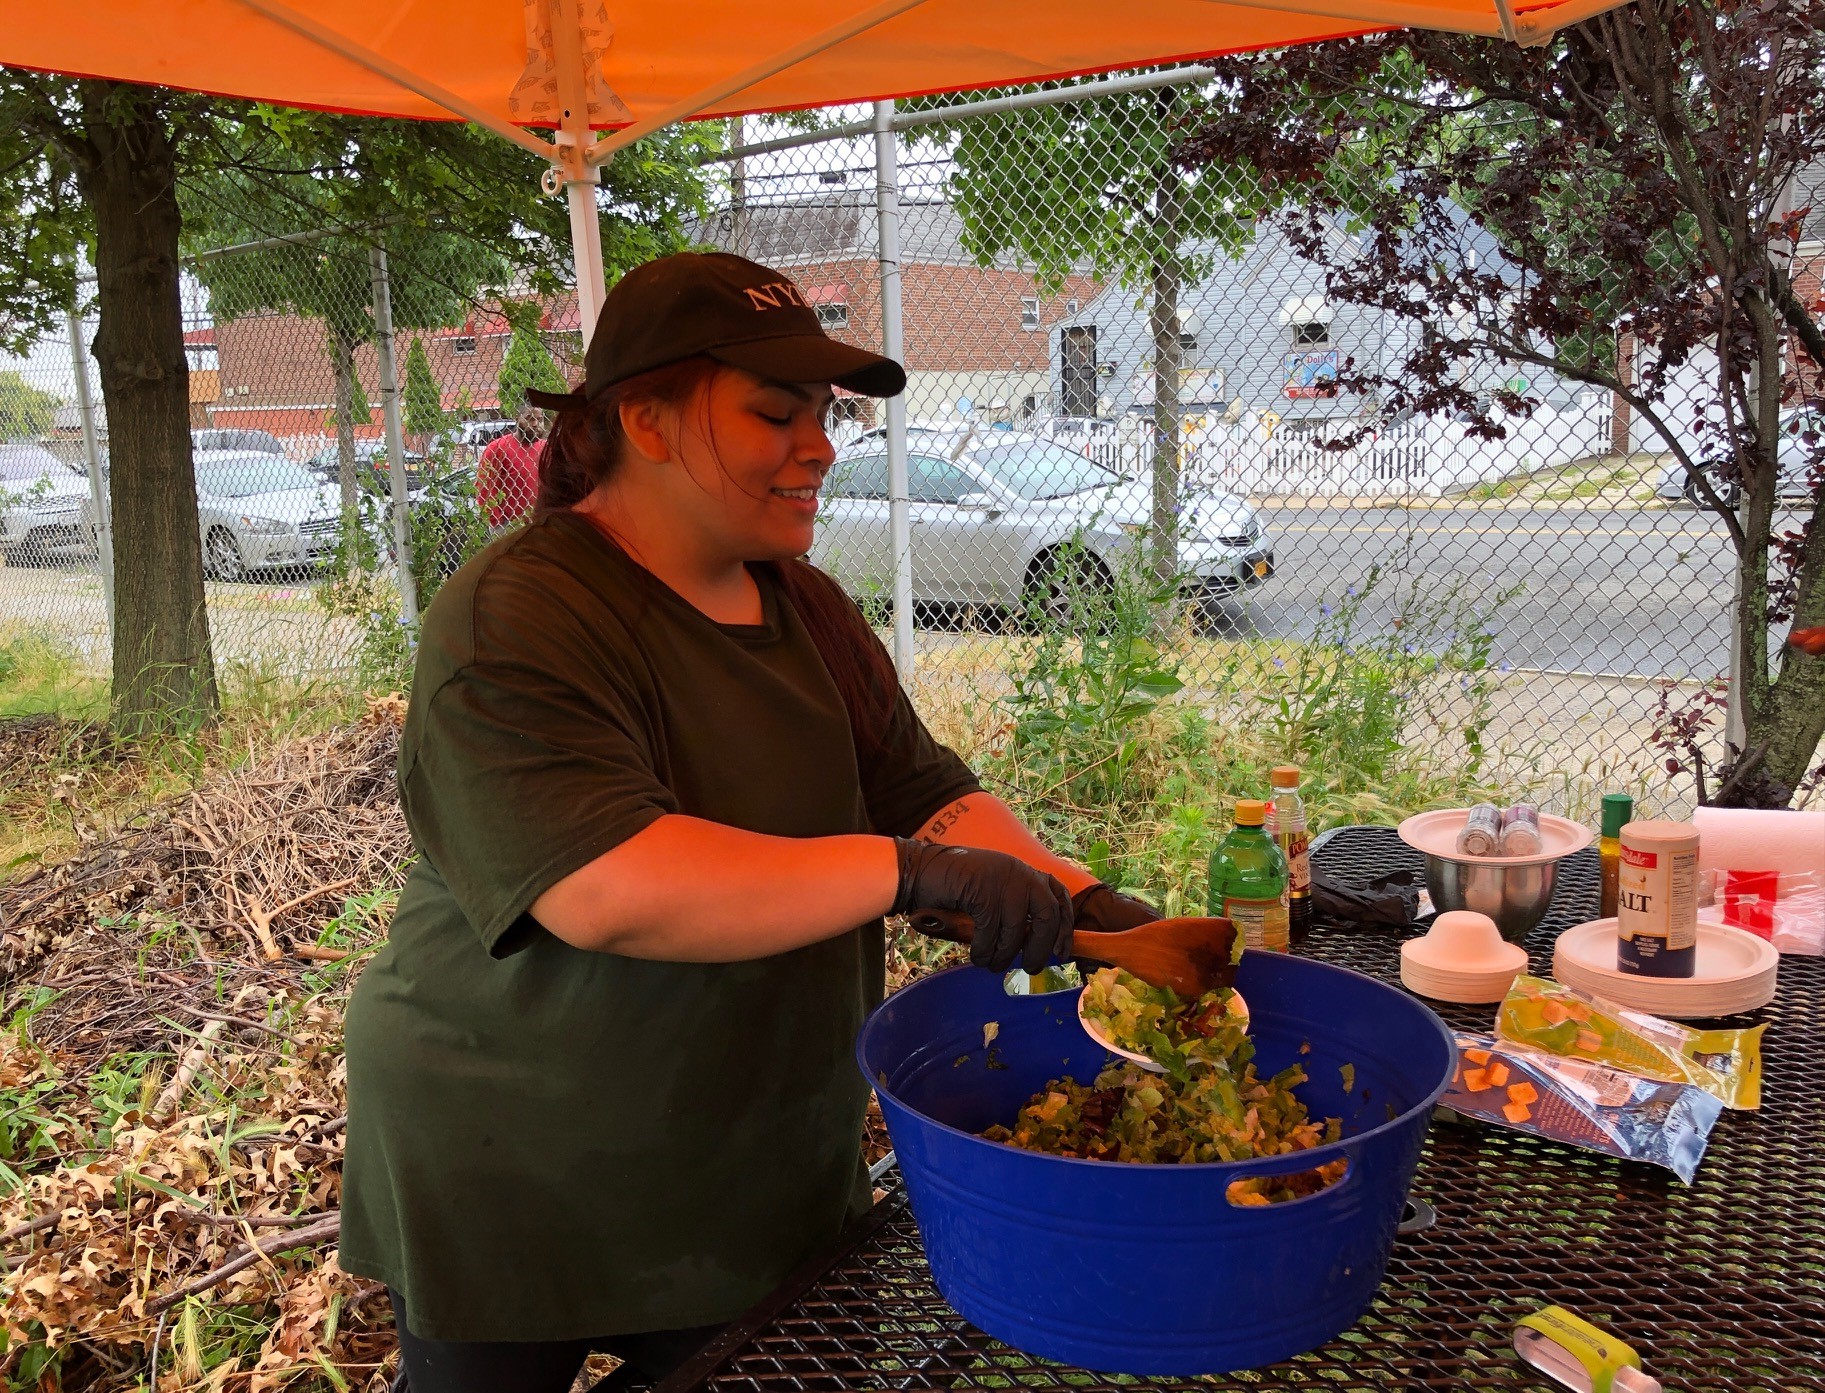 A person in a baseball cap works with compost during an outdoor event